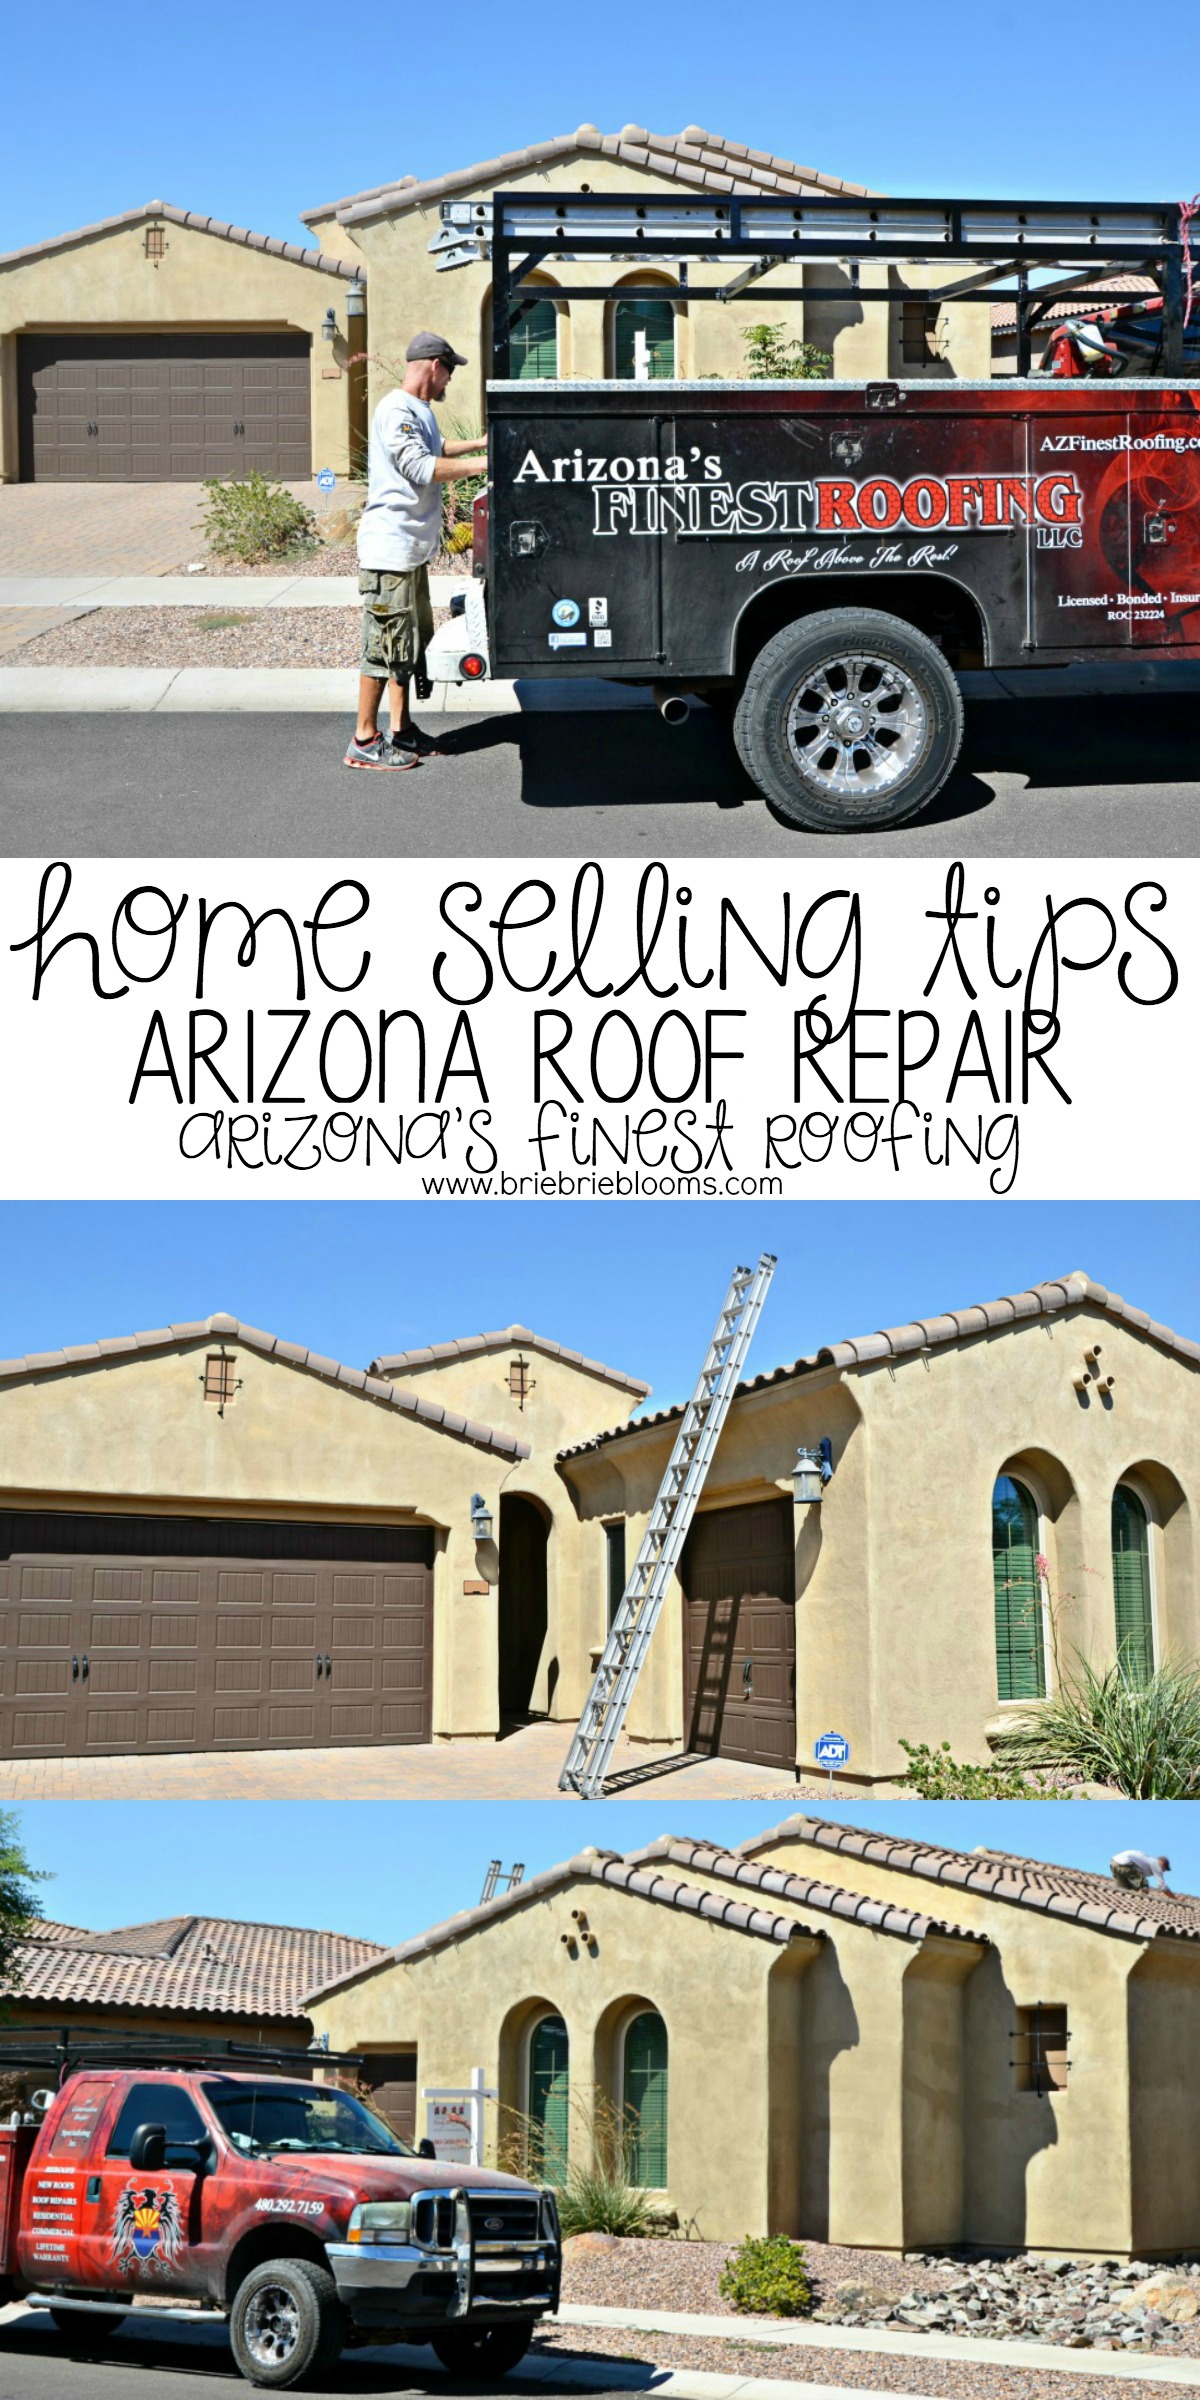 My best home selling tips include roof repair and maintenance. Get your Arizona roof repaired by Arizona's Finest Roofing for a great experience.